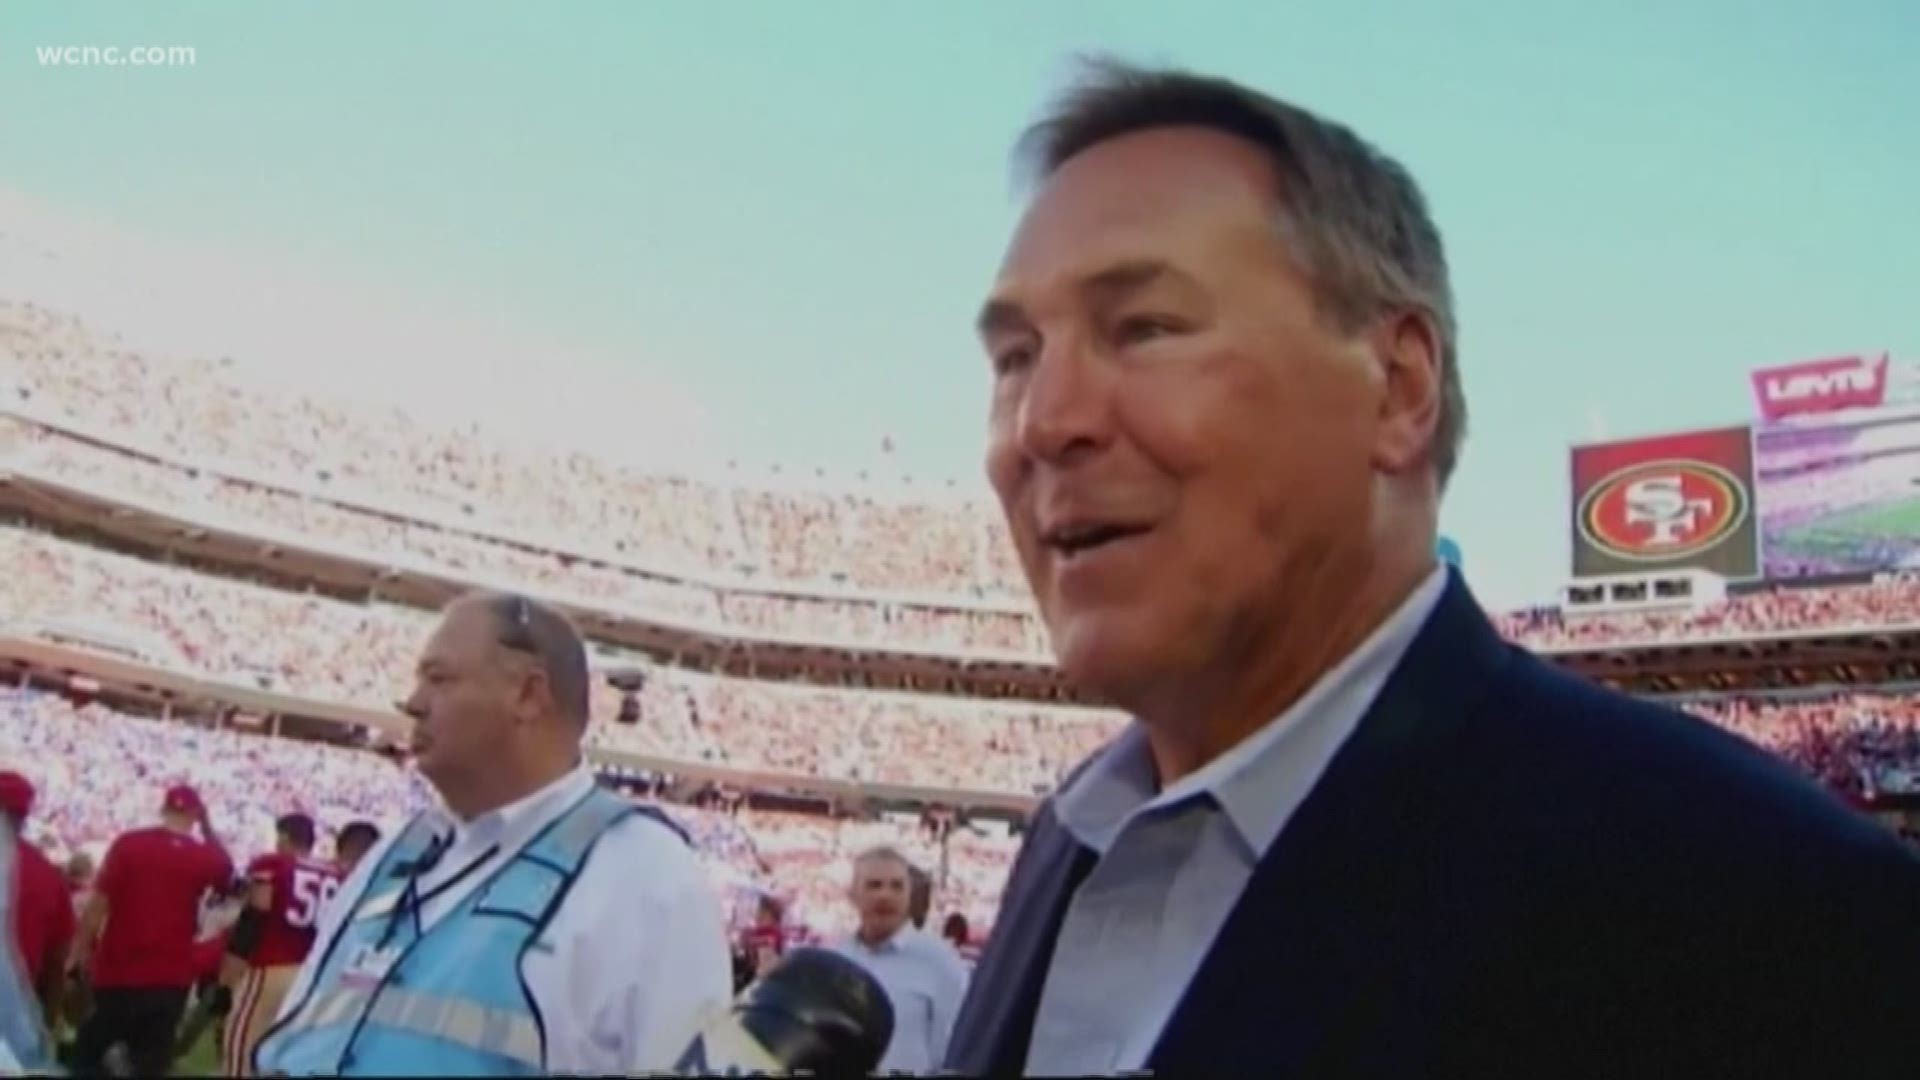 Dwight Clark is best known for hauling in 'The Catch' during the 1981 NFC Championship Game.